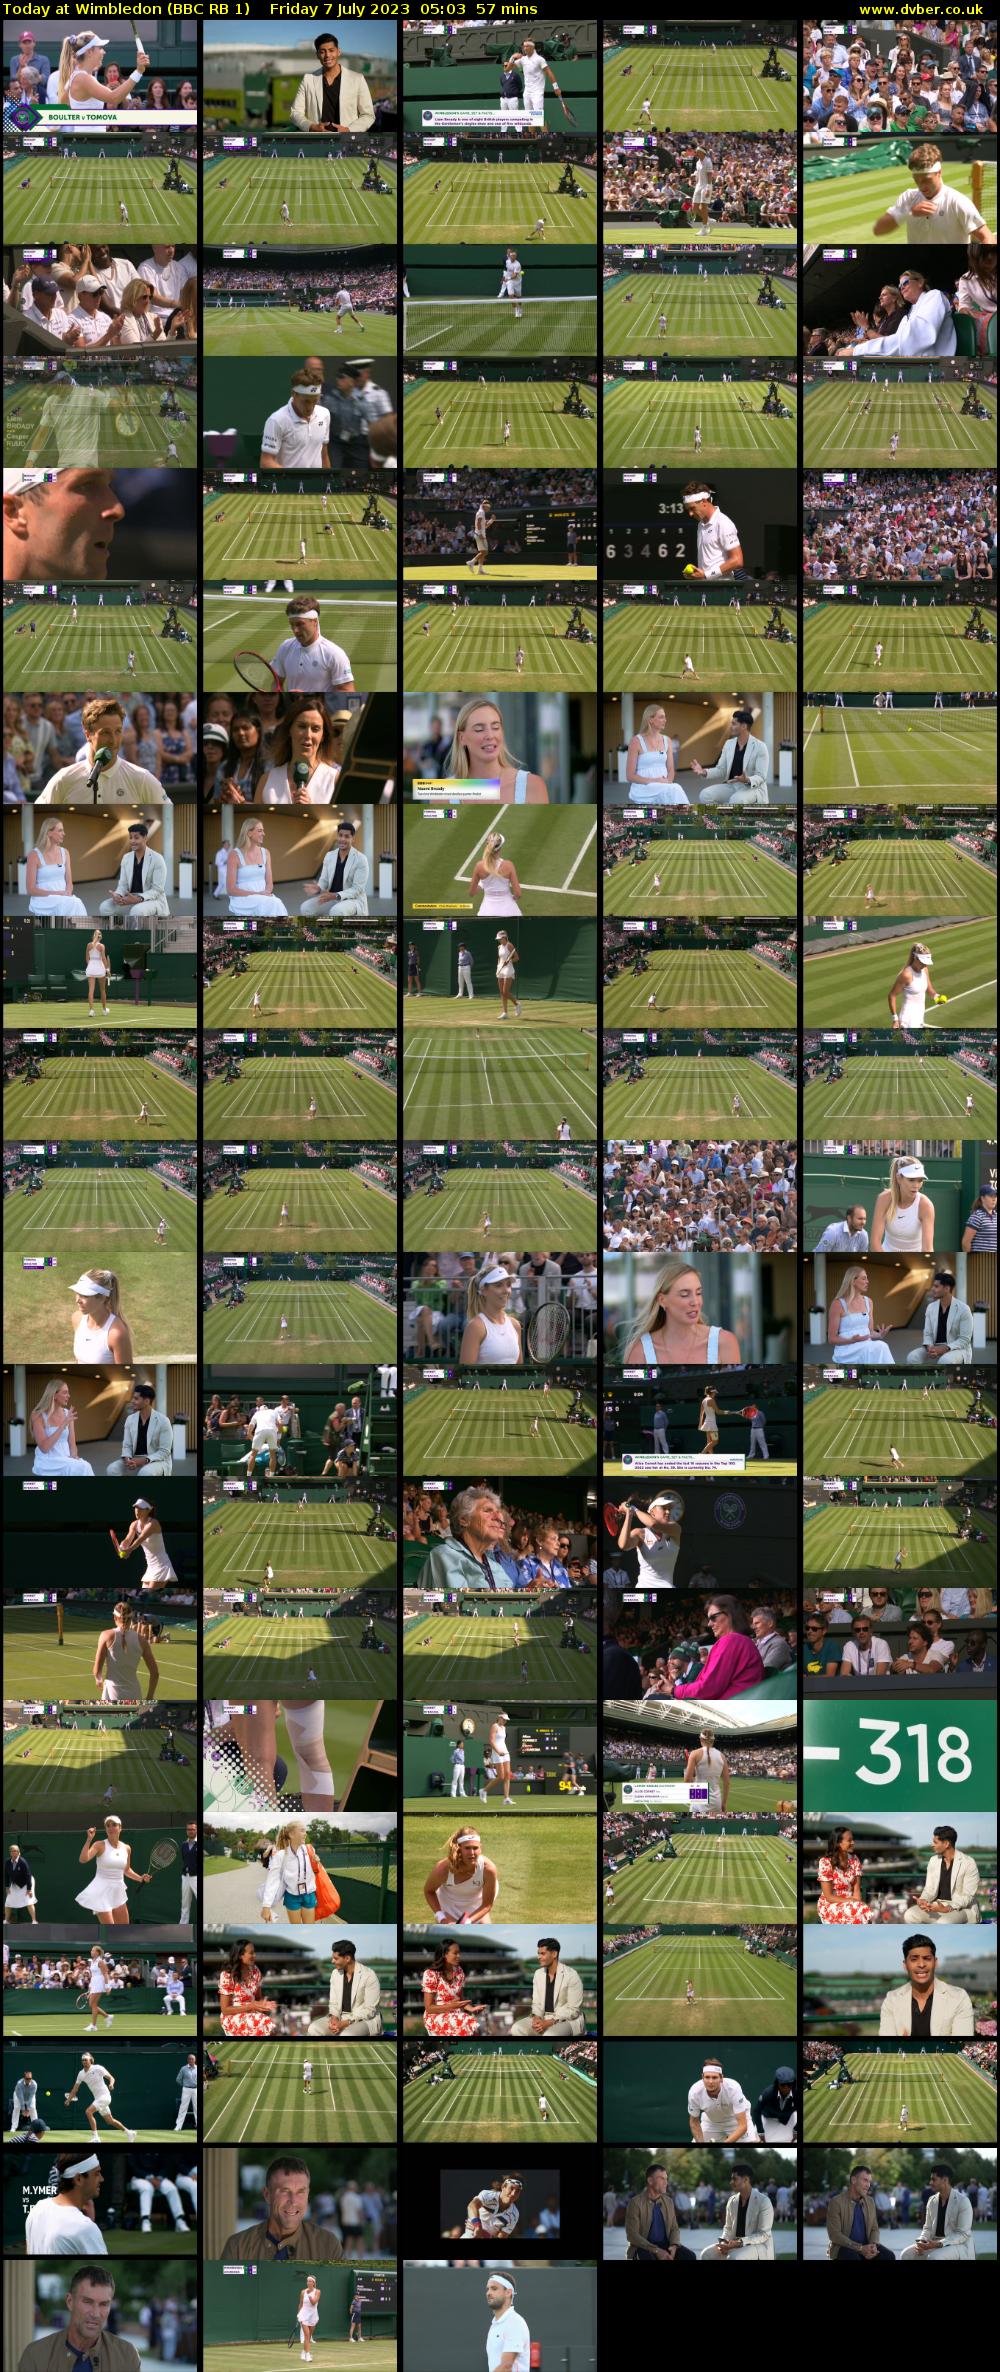 Today at Wimbledon (BBC RB 1) Friday 7 July 2023 05:03 - 06:00